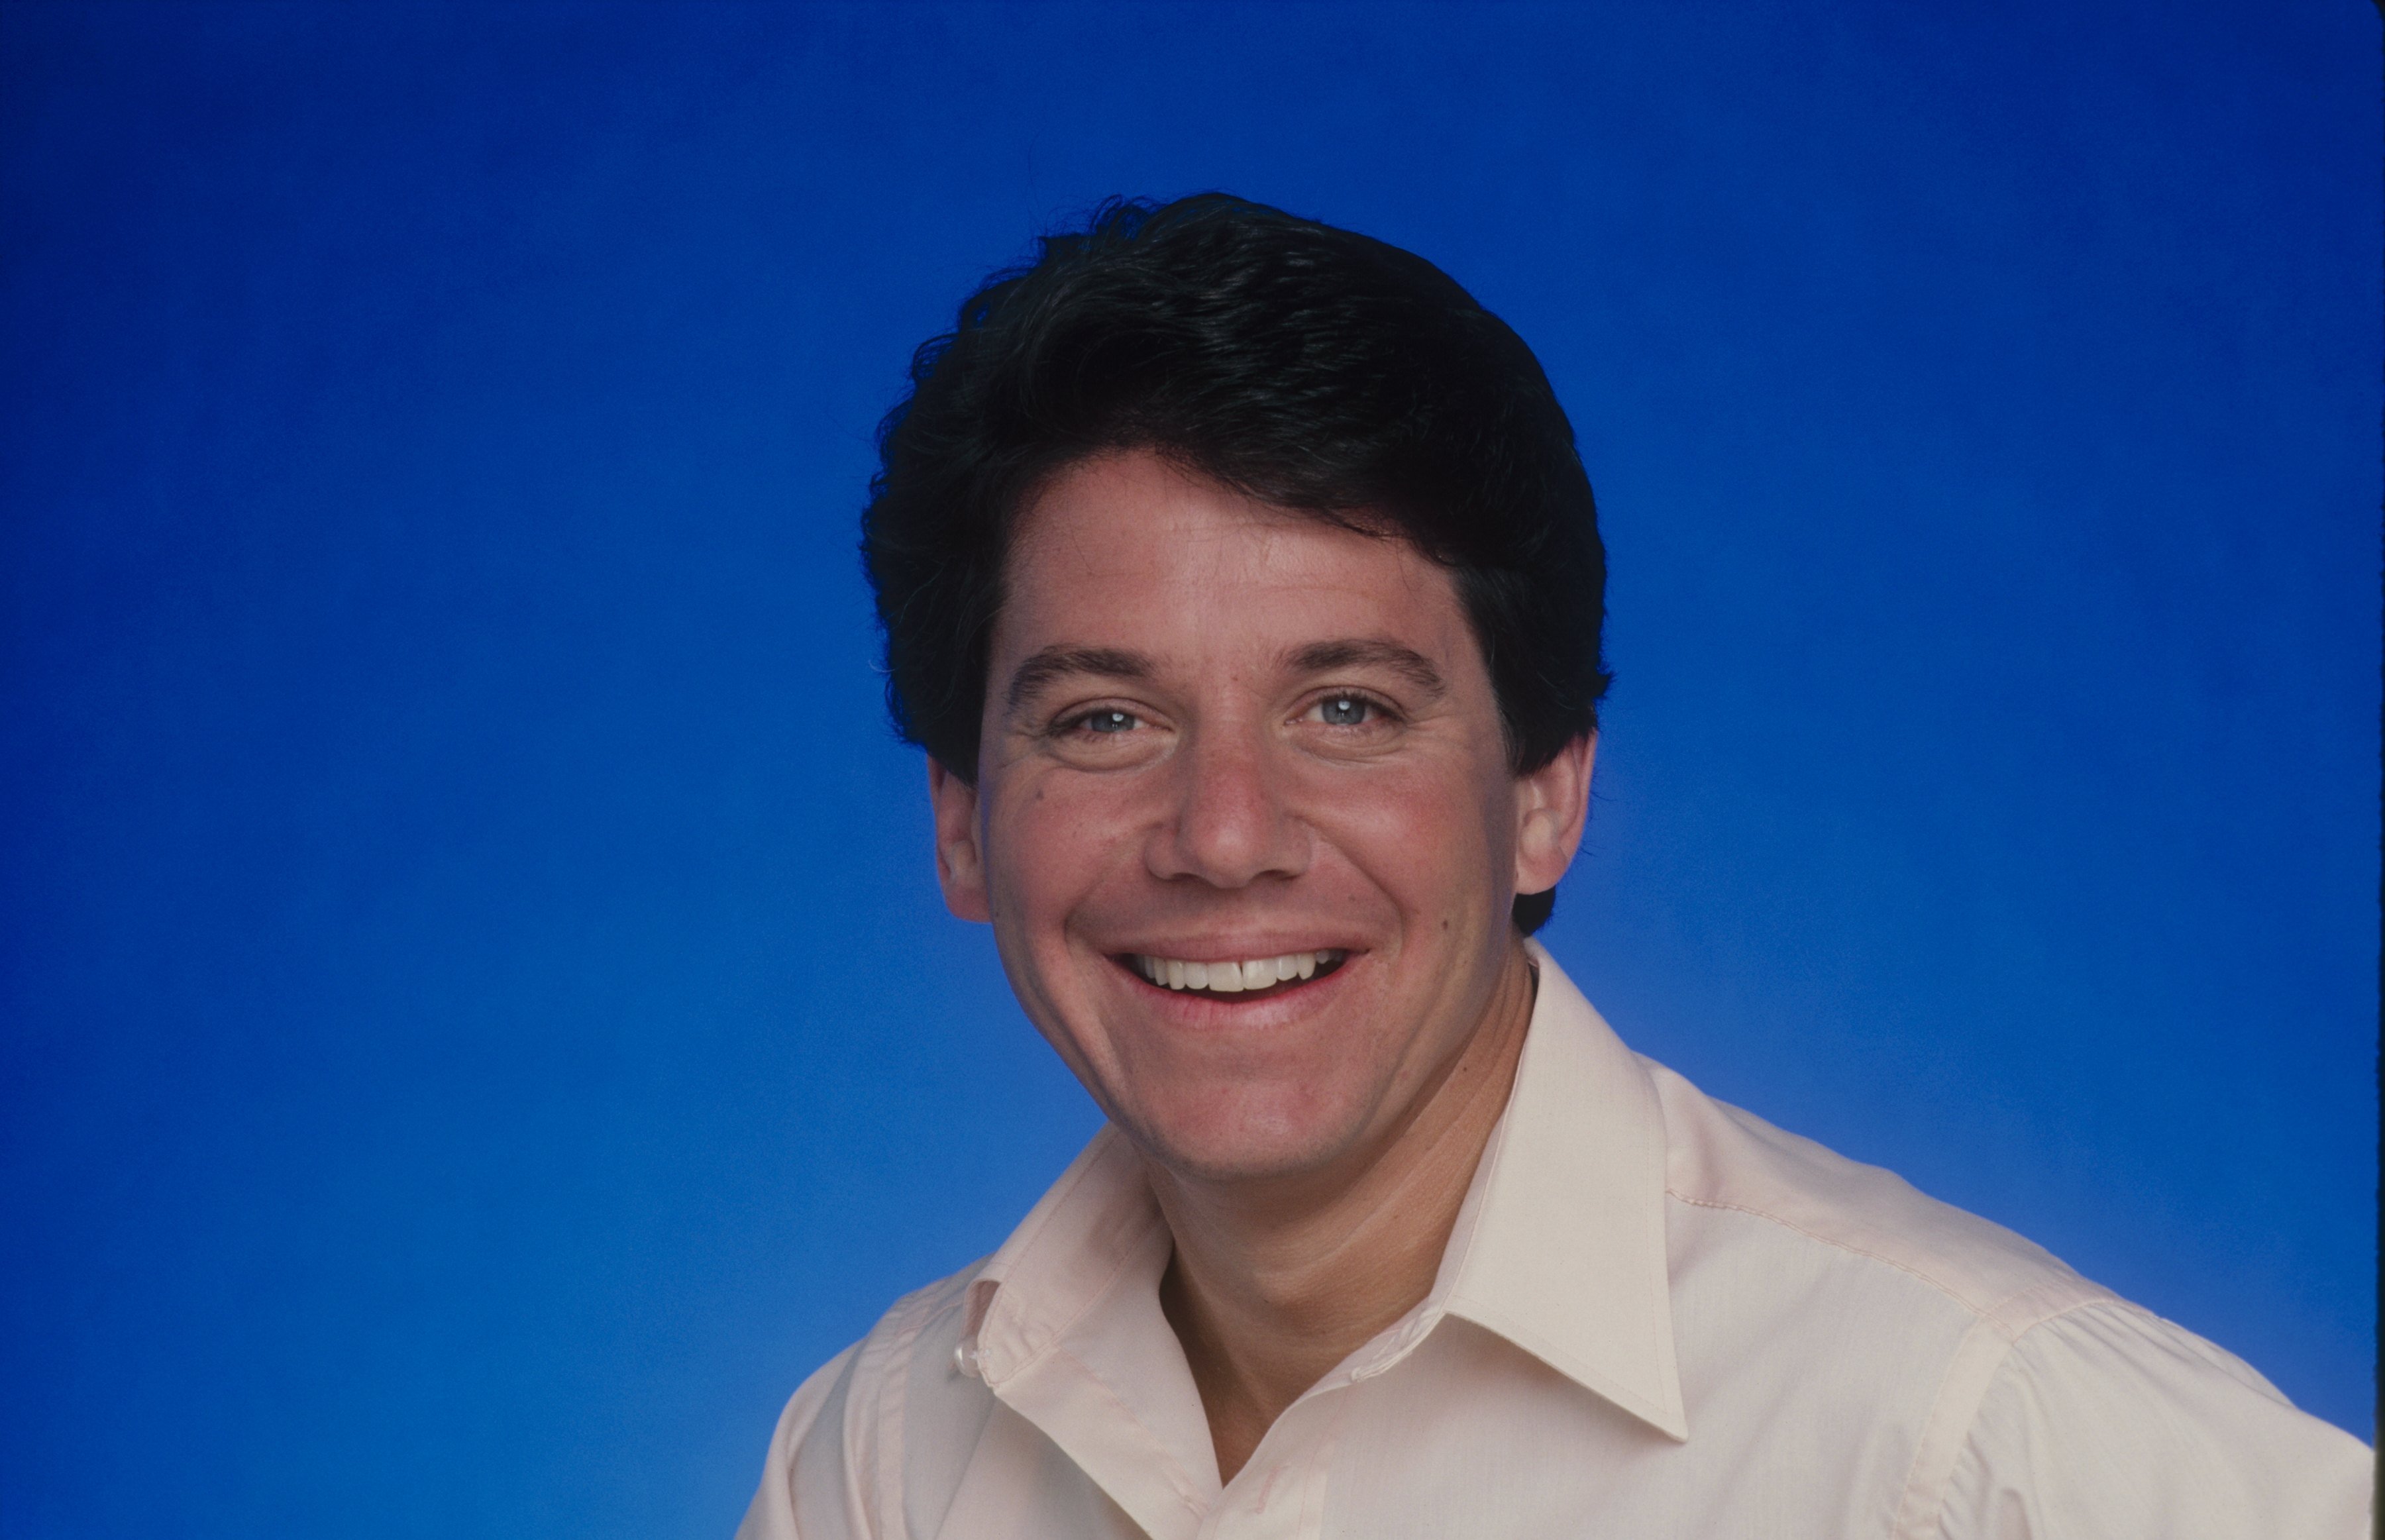 Photo of Anson Williams as Potsie Weber in "Happy Days" | Photo: Getty Images